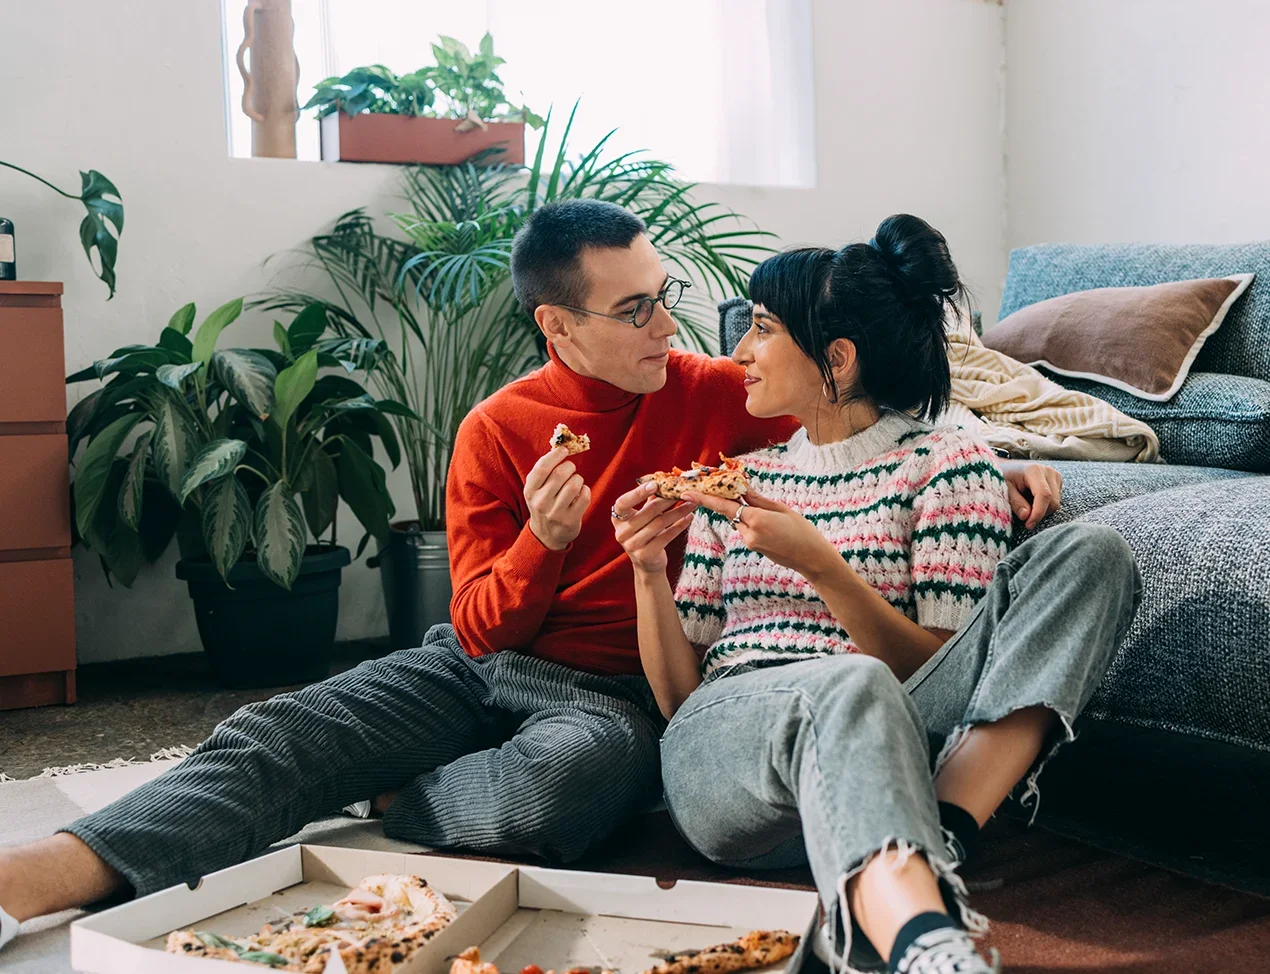 Couple sit on the floor eating pizza together in their living room.